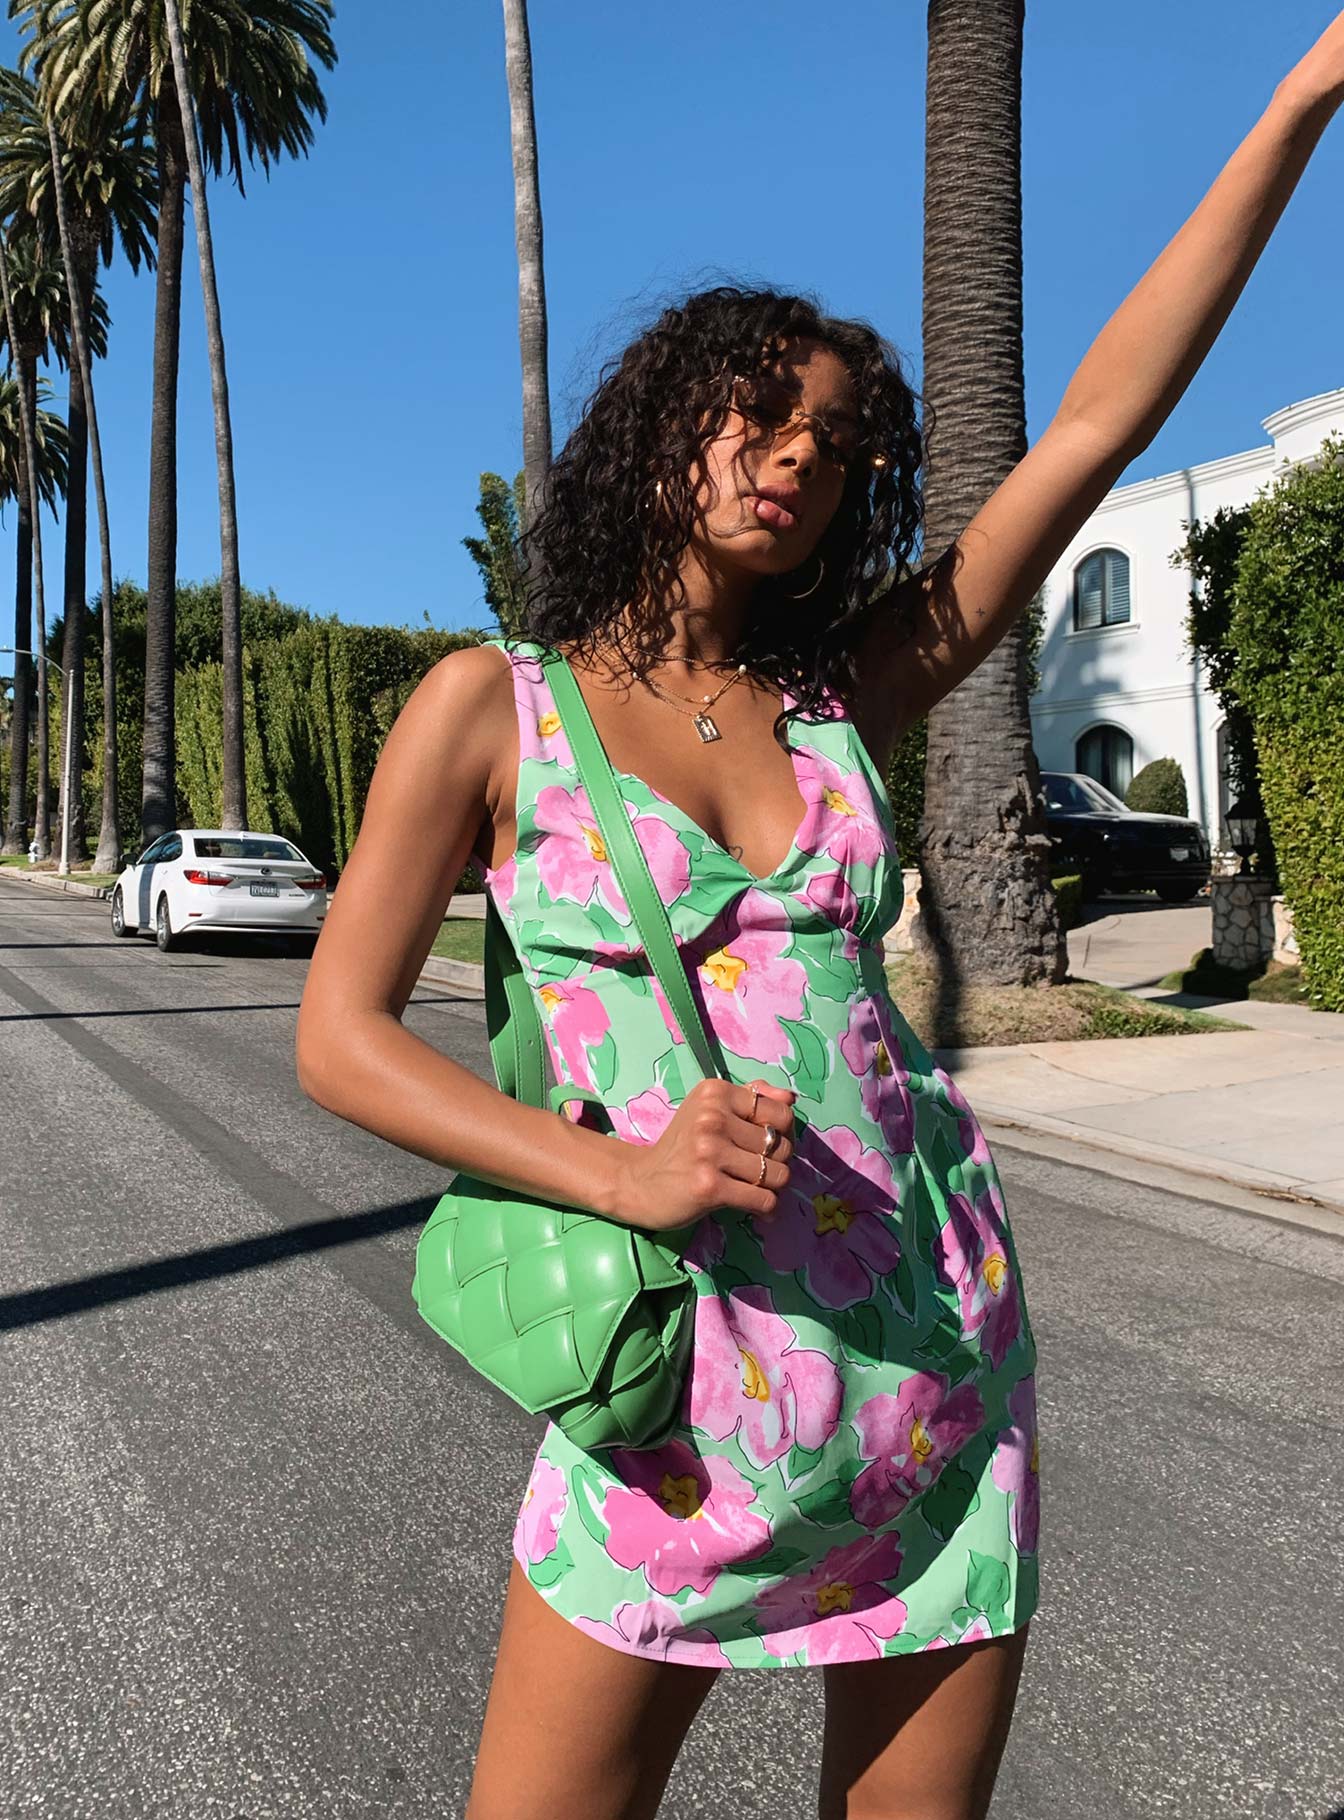 Pink and Green Dress